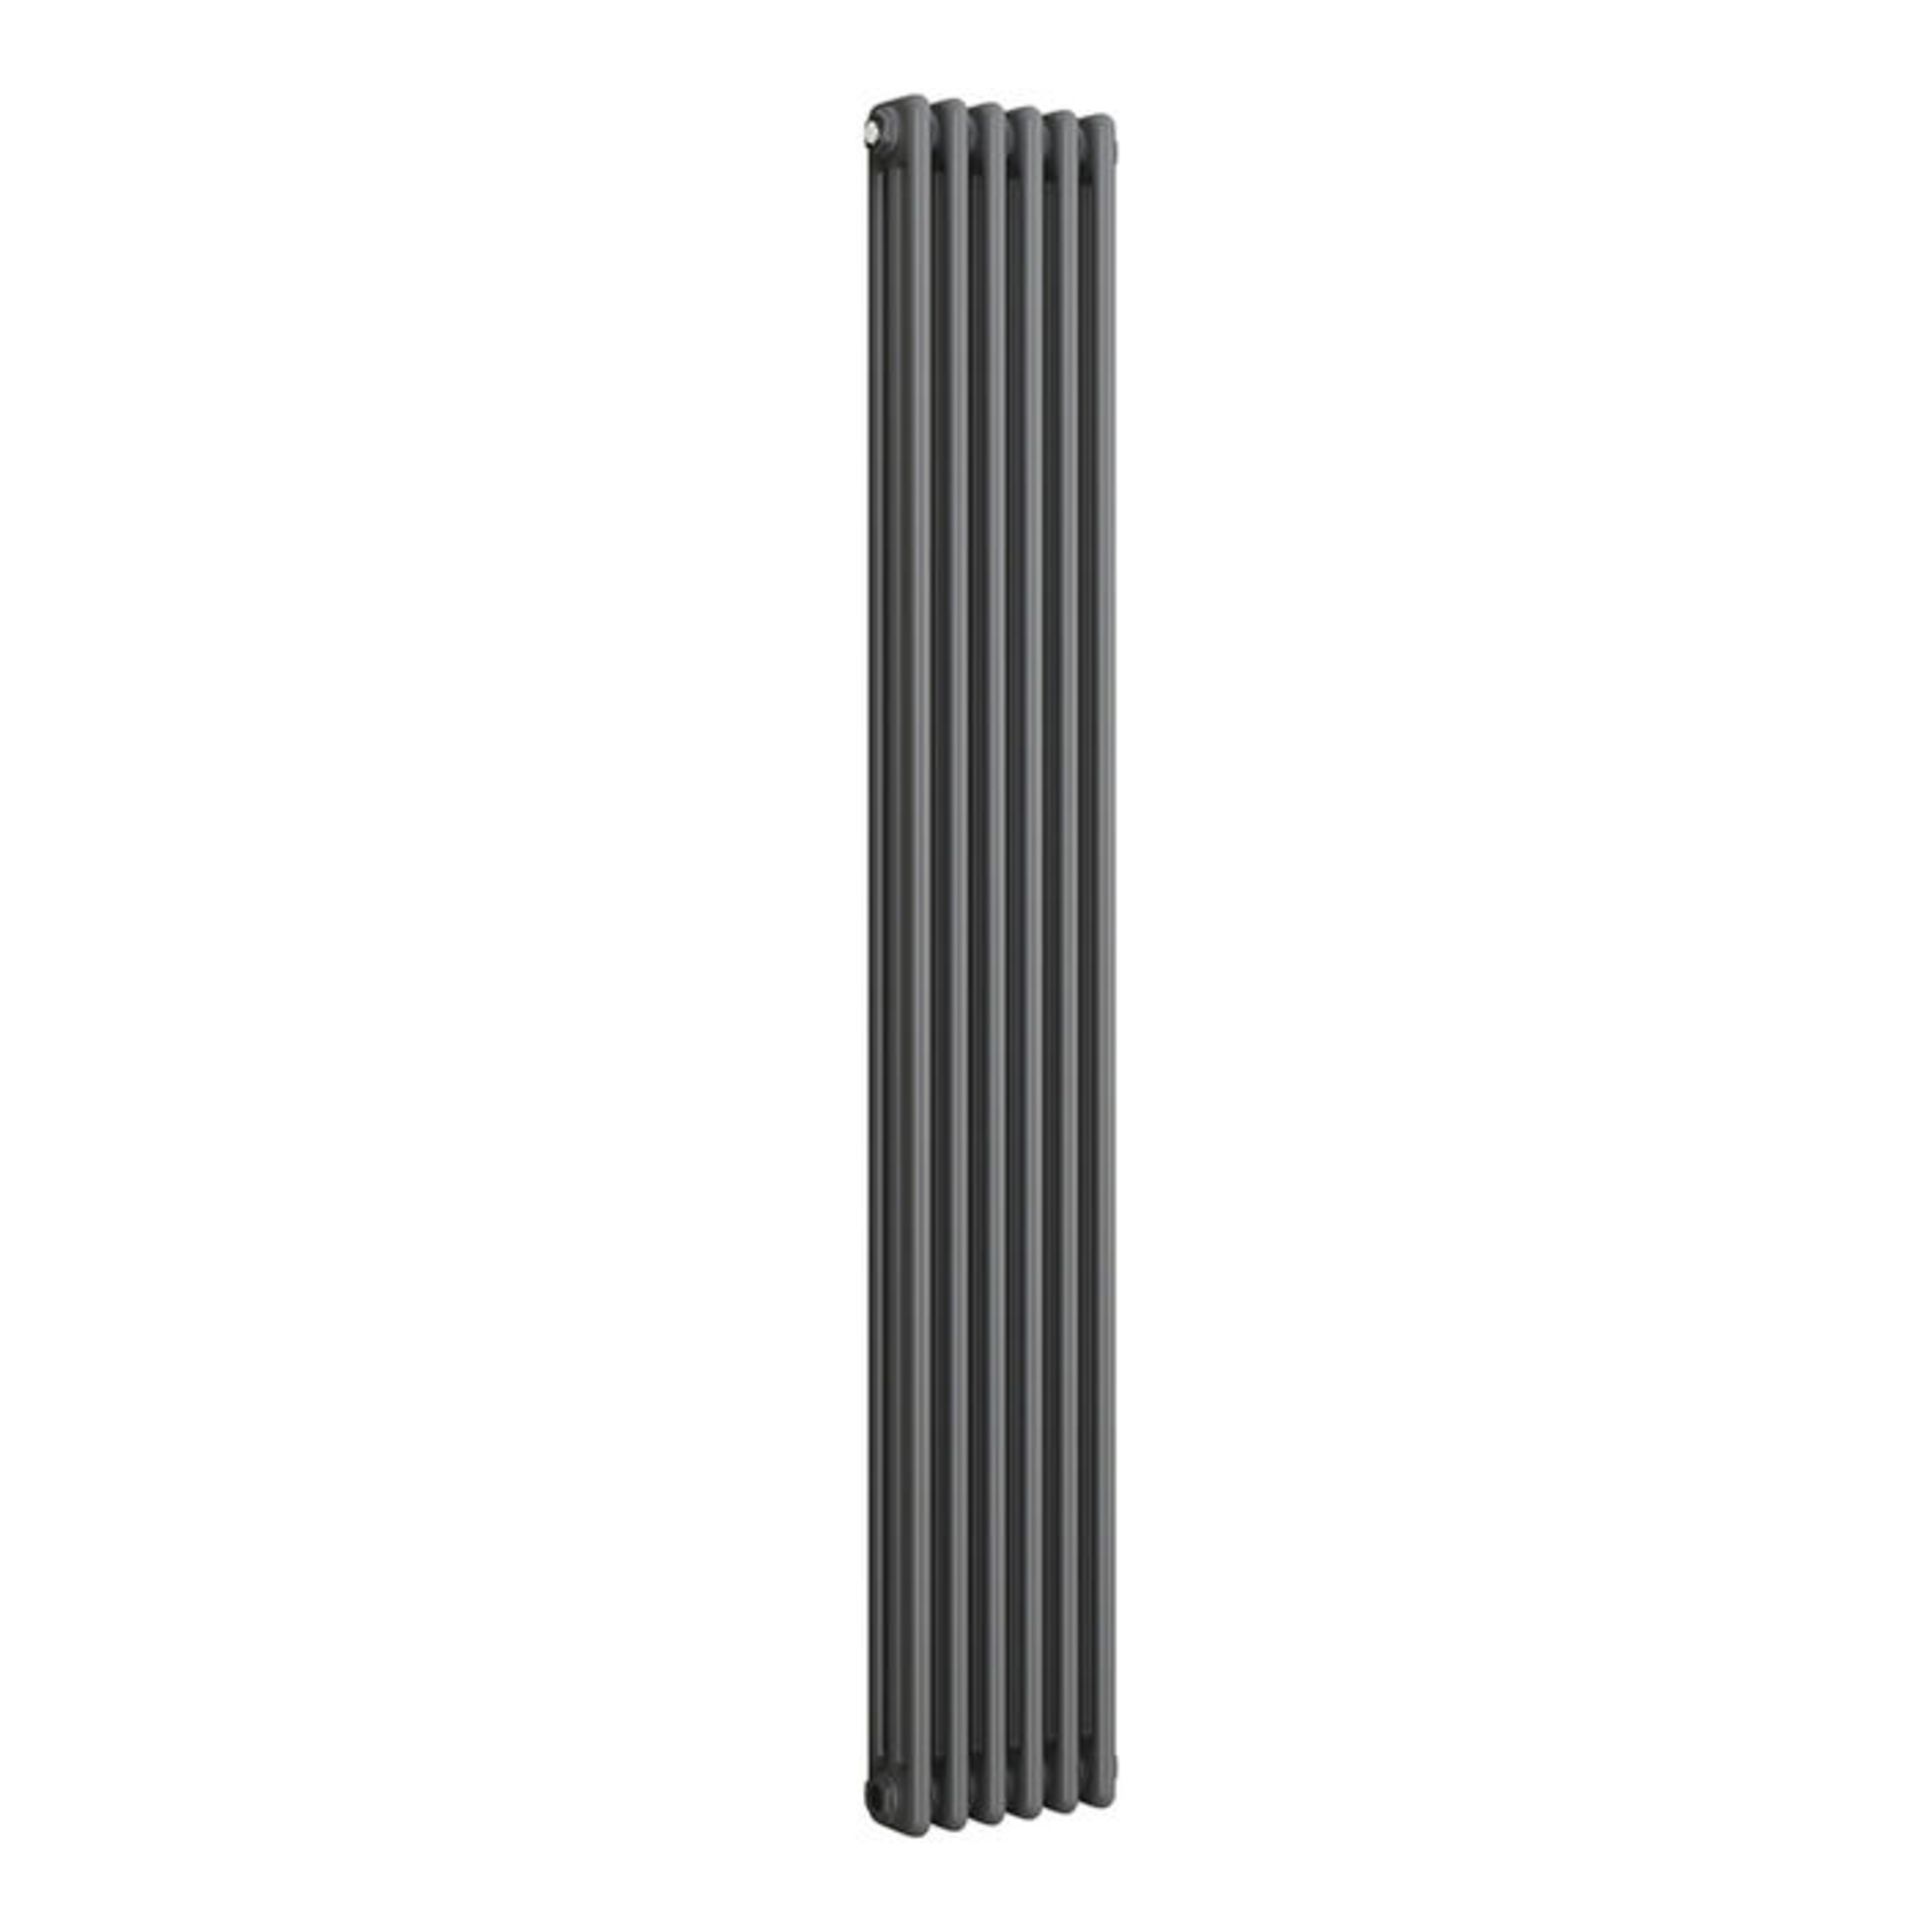 (P58) 1800x290mm Anthracite Triple Panel Vertical Colosseum Traditional Radiator. RRP £309.99. - Image 3 of 3